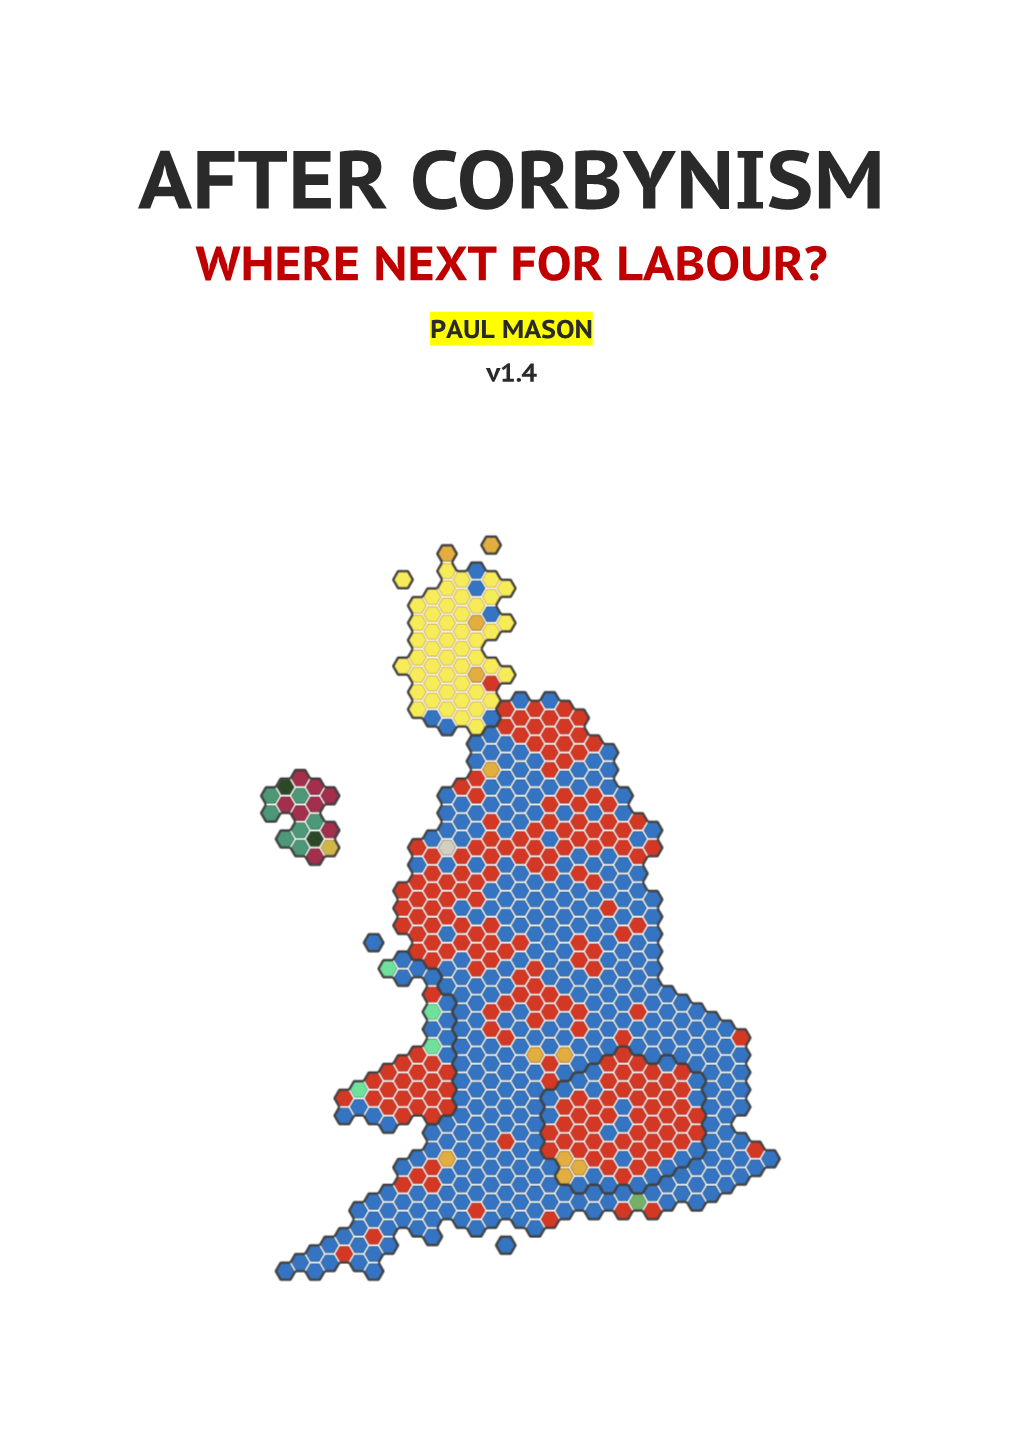 After Corbynism: Where Next for Labour